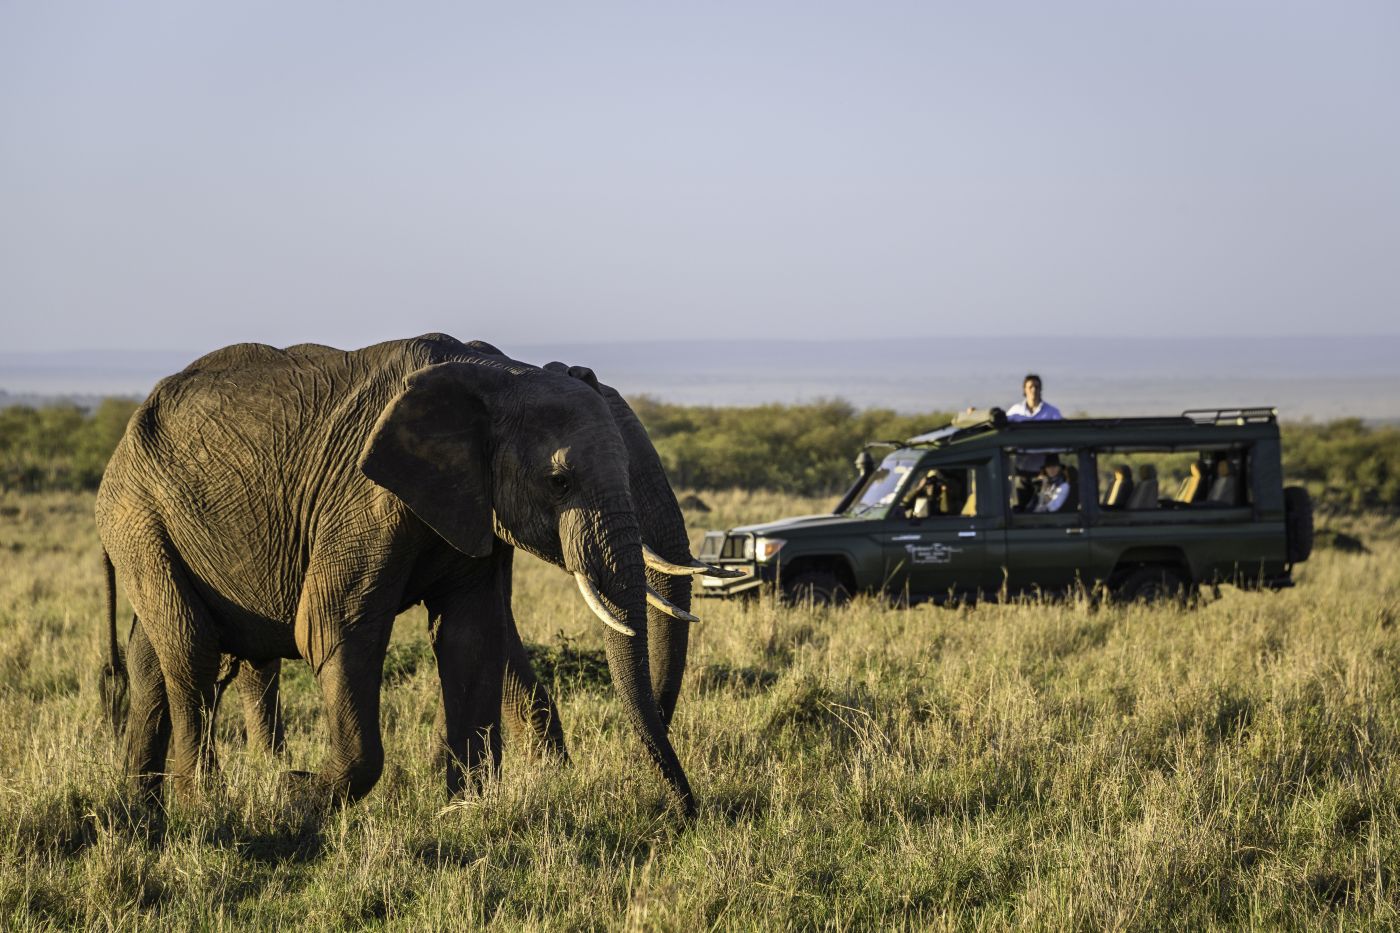 Guests in a safari jeep driving past two elephants at Governors Camp in Kenya